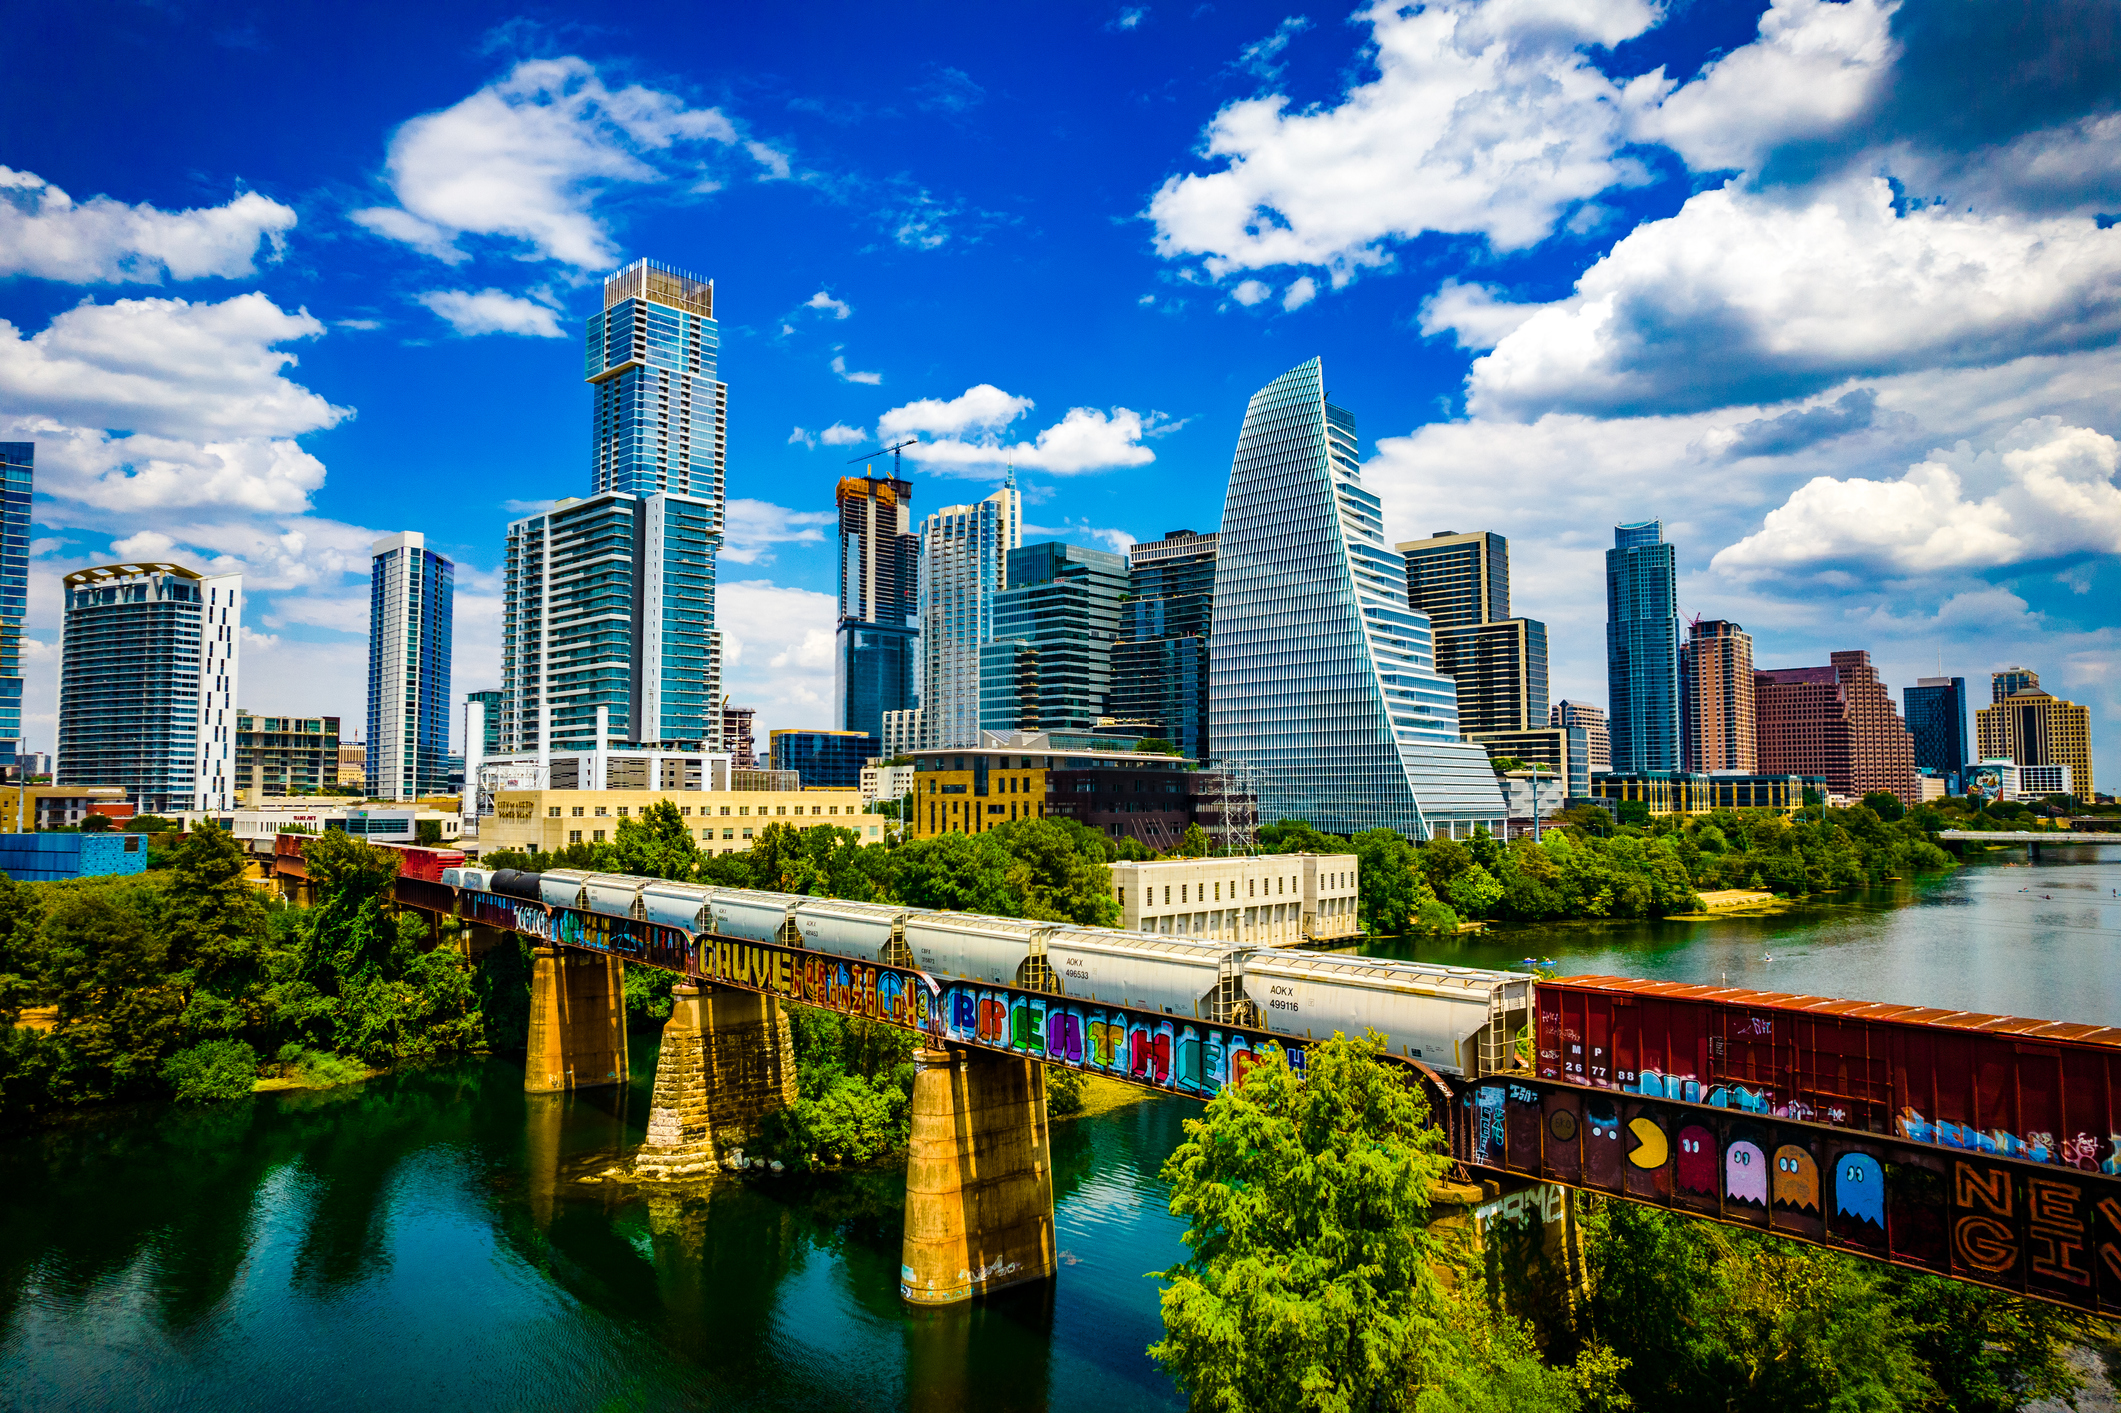 Austin , Texas , USA - September 1st 2022: Aerial Drone View over Austin during a Gorgeous Day along the Colorado River or Lady Bird Lake with a perfect Futuristic Skyline Background